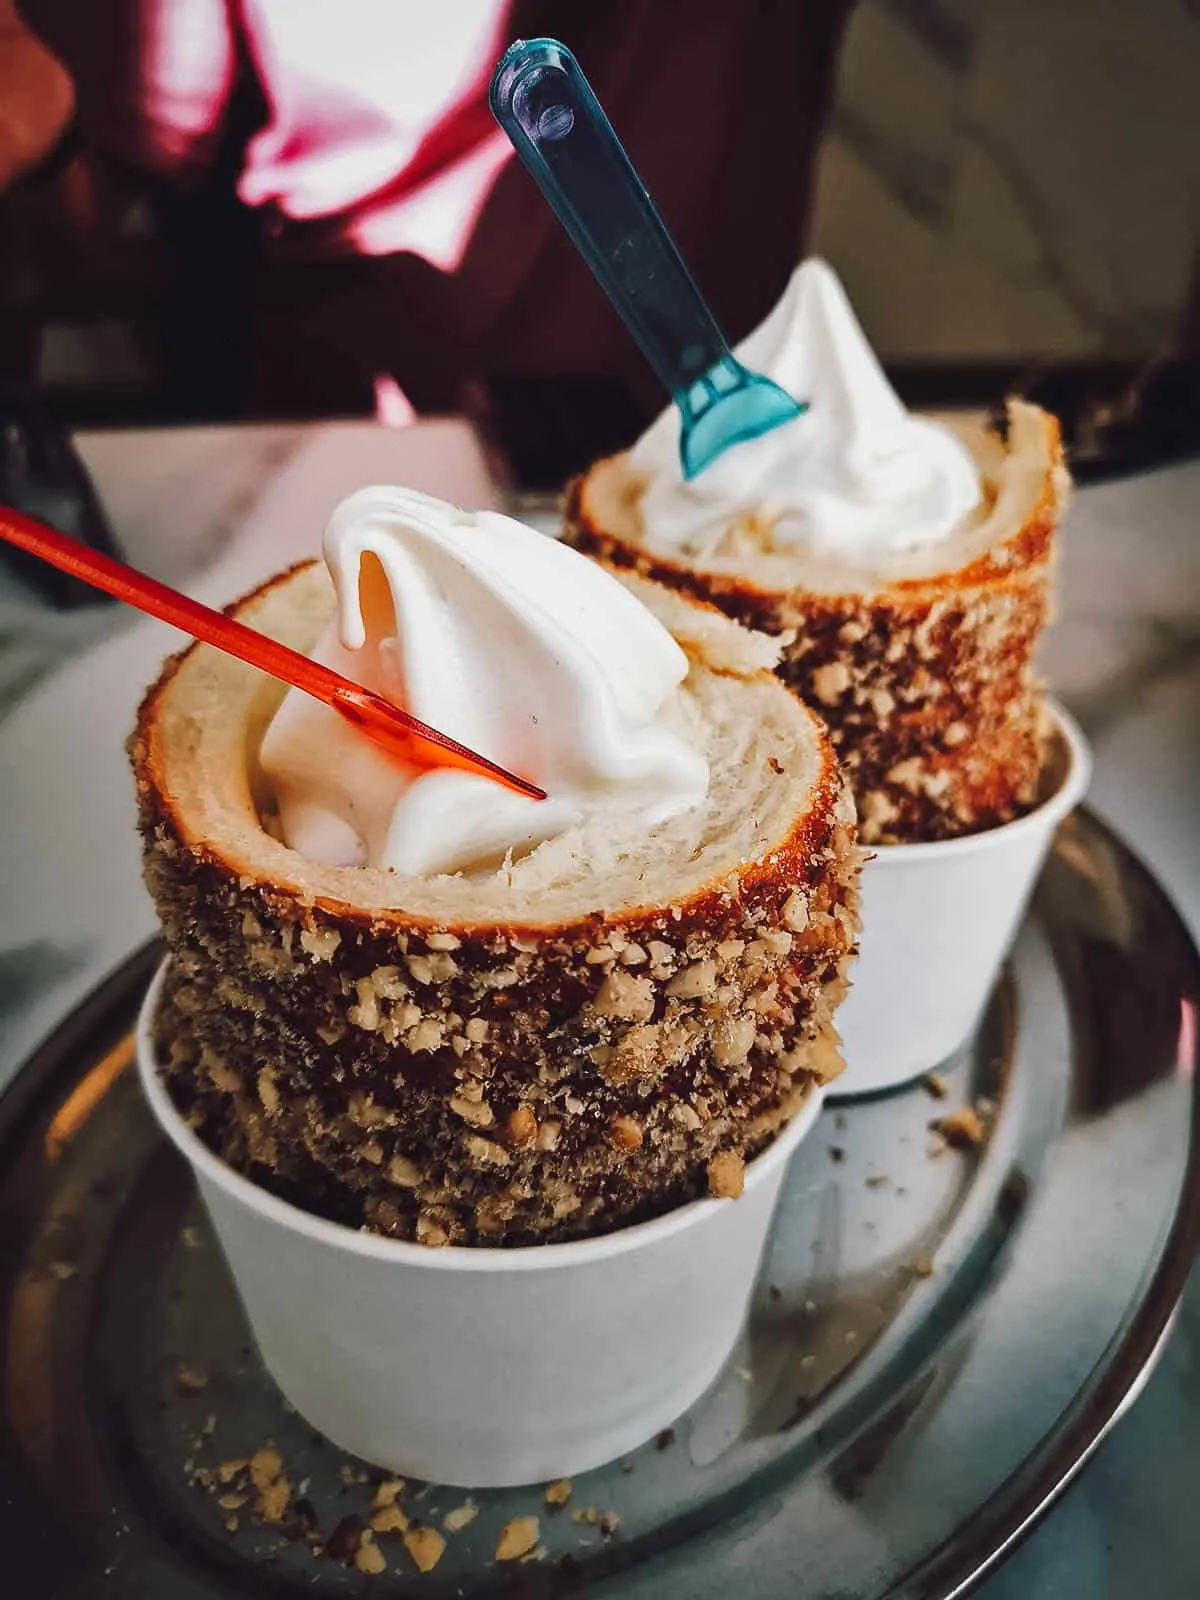 Hungarian chimney cakes with soft serve ice cream at Molnar's Kurtoskalacs in Budapest, Hungary